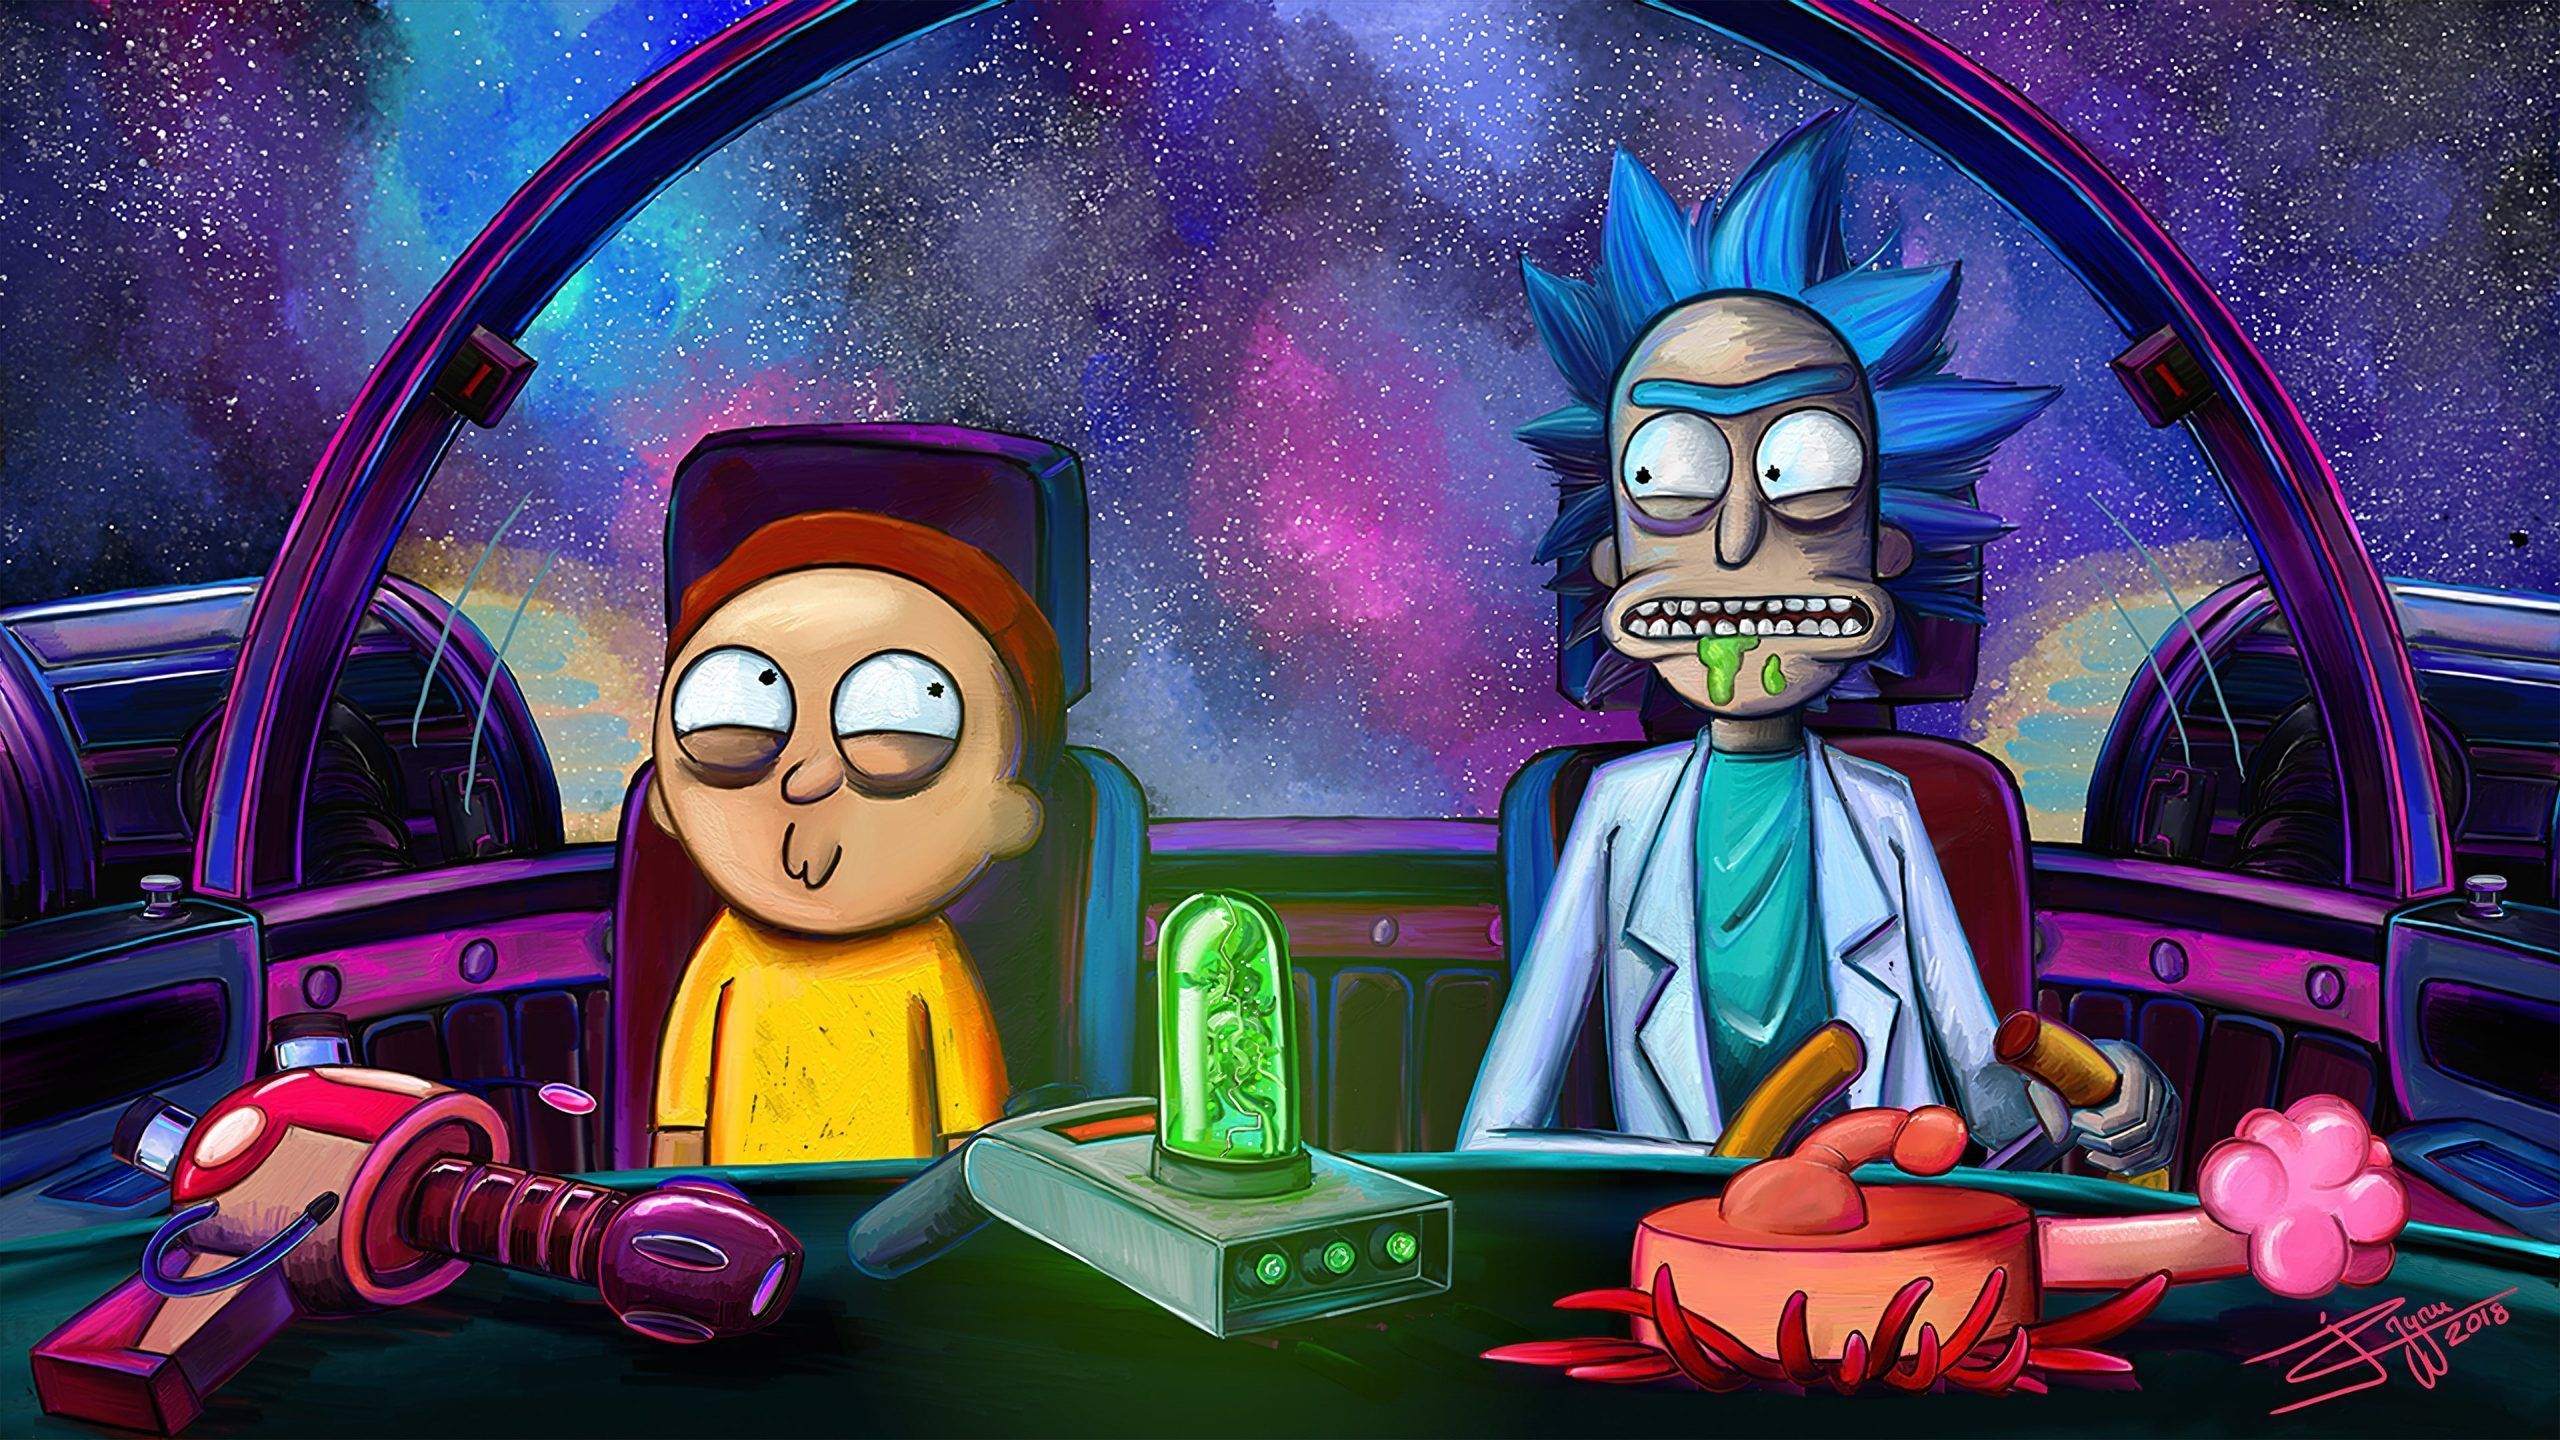 Rick and morty, person hd wallpaper - Rick and Morty